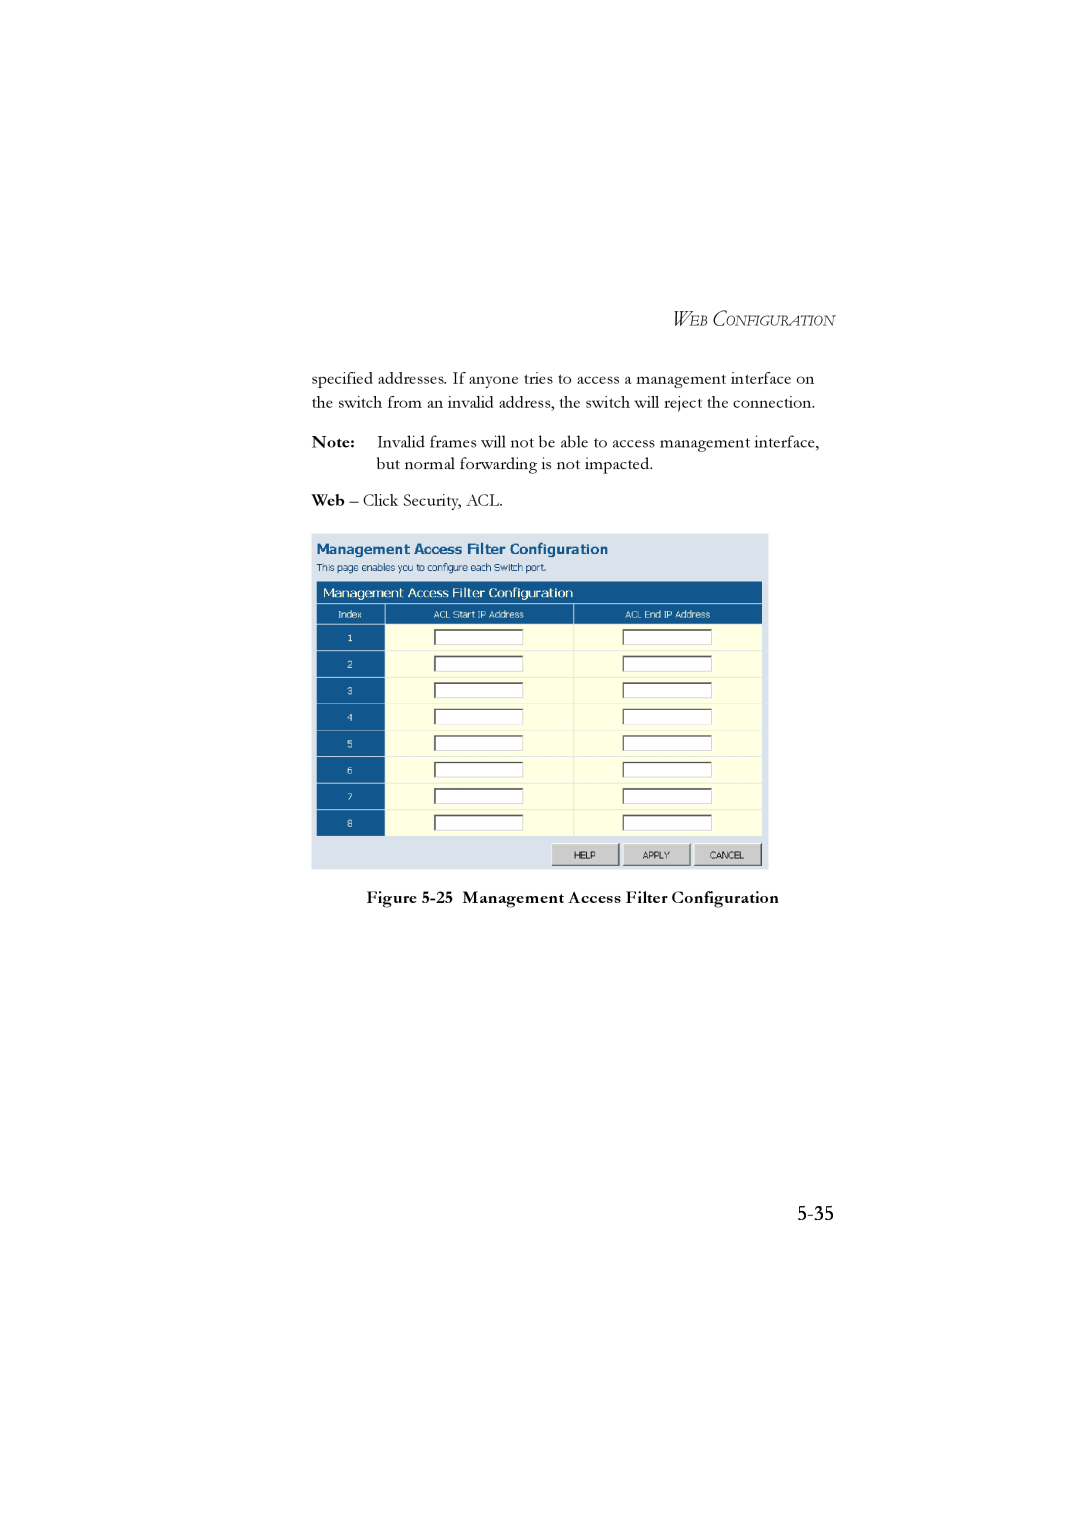 LevelOne GSW-2476 user manual 5-35, 25 Management Access Filter Configuration 